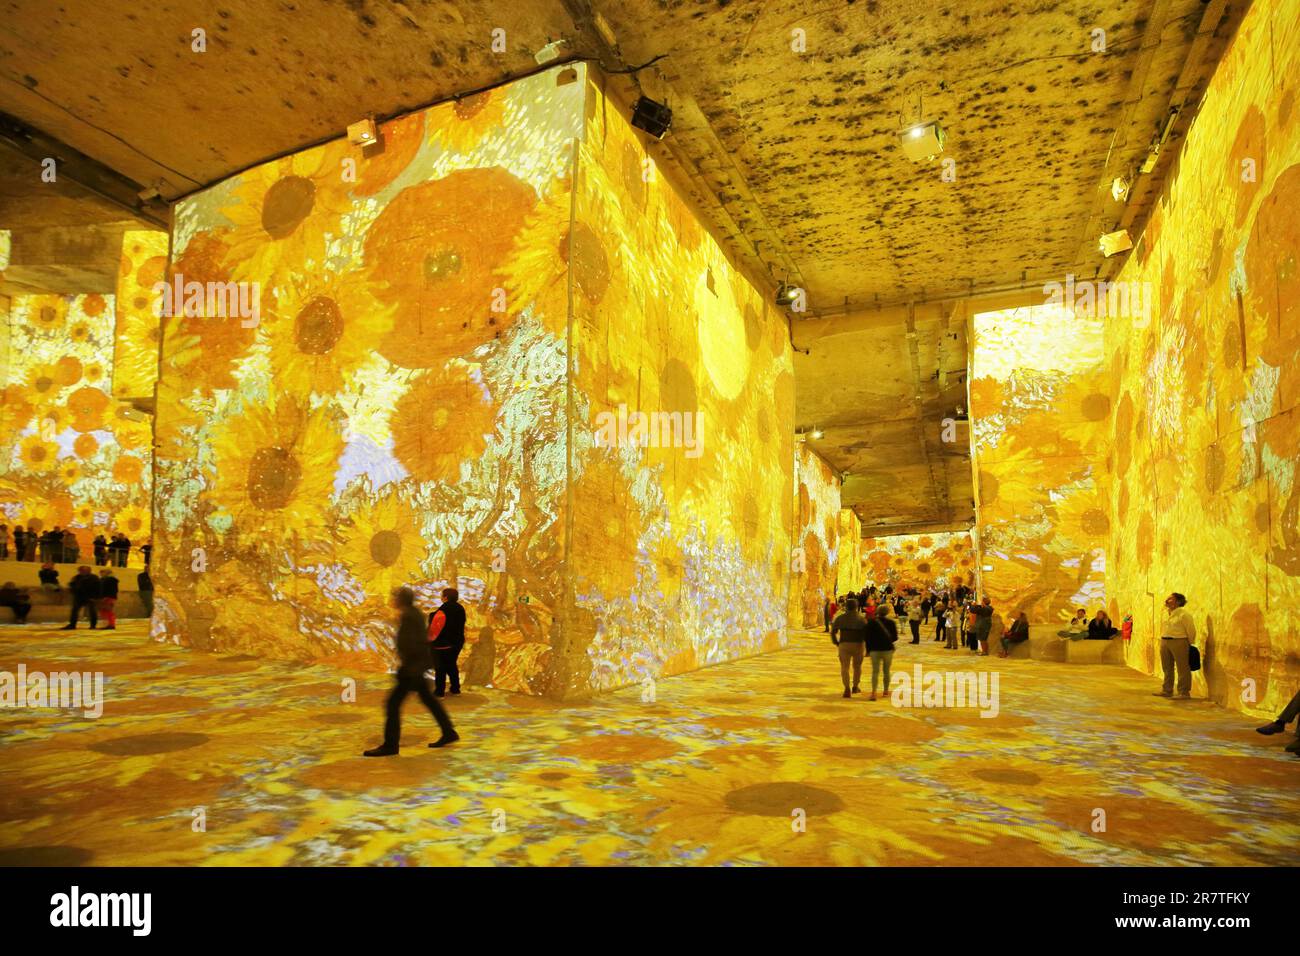 Carrieres des Lumieres with show Vermeer a Van Gogh, sunflowers, painting, Vincent van Gogh, quarries, cathedral, rock face, people, spectators Stock Photo